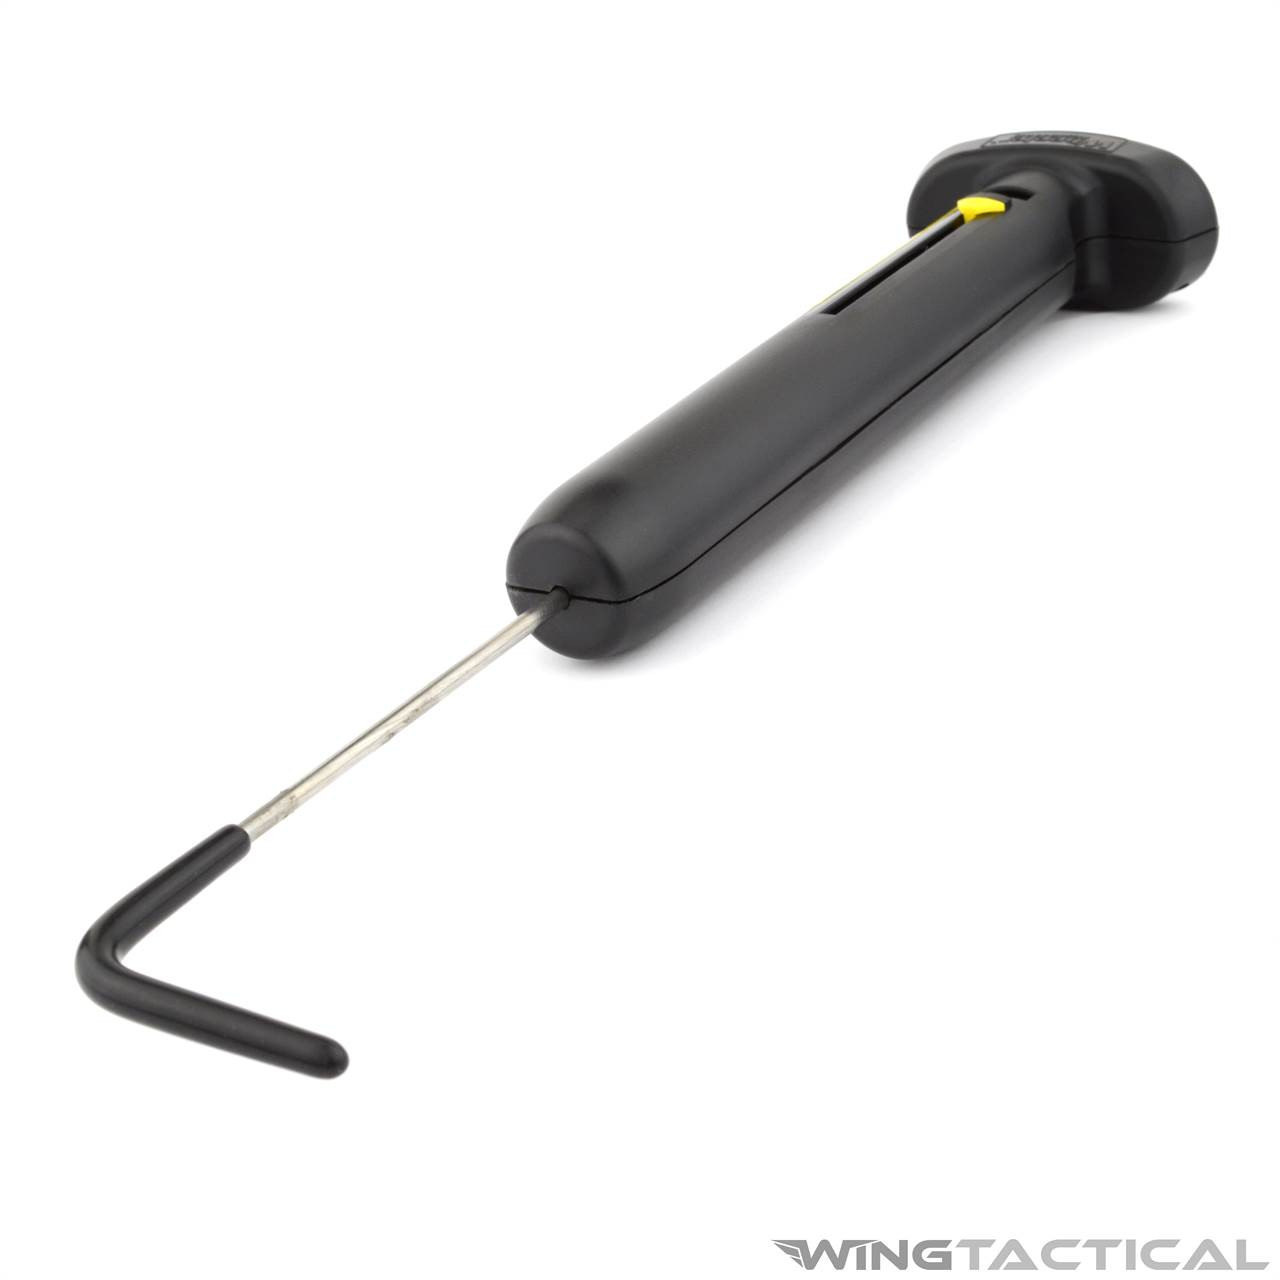 Wheeler Engineering Trigger Pull Scale (8oz-8lb)